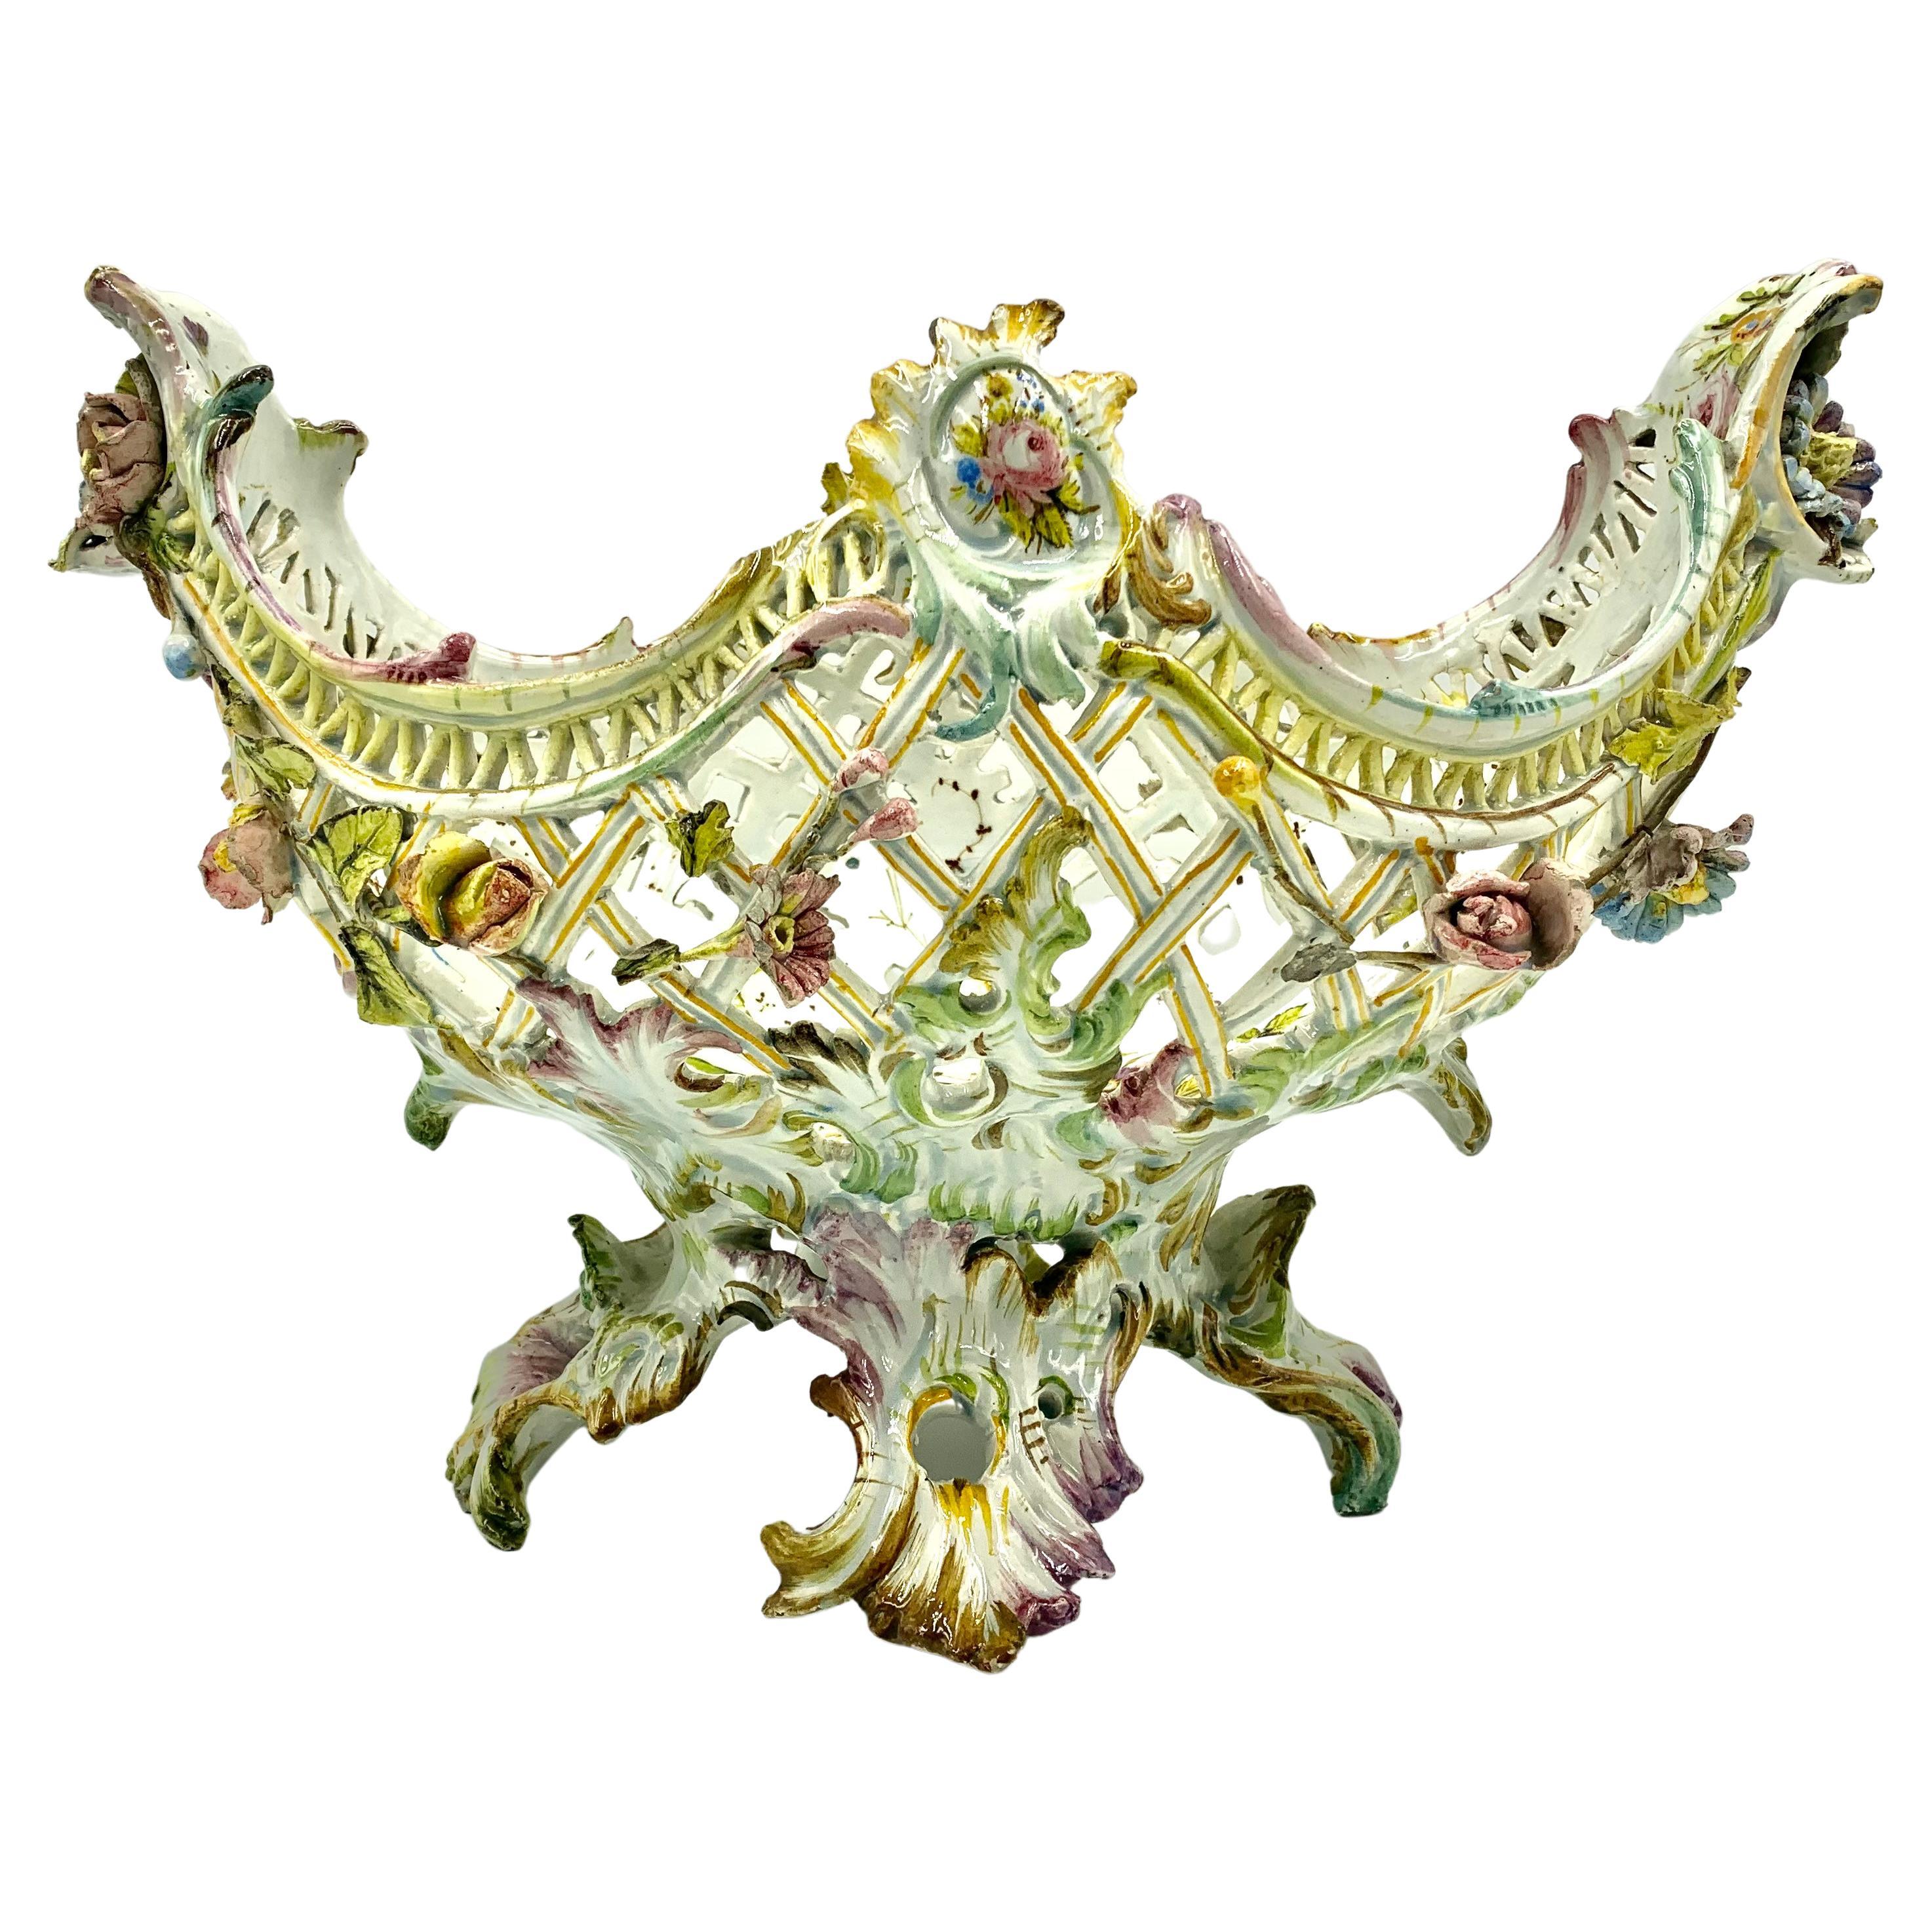 Rare Reticulated Antique Italian Nove Faience Rococo Flower Garland Centerpiece For Sale